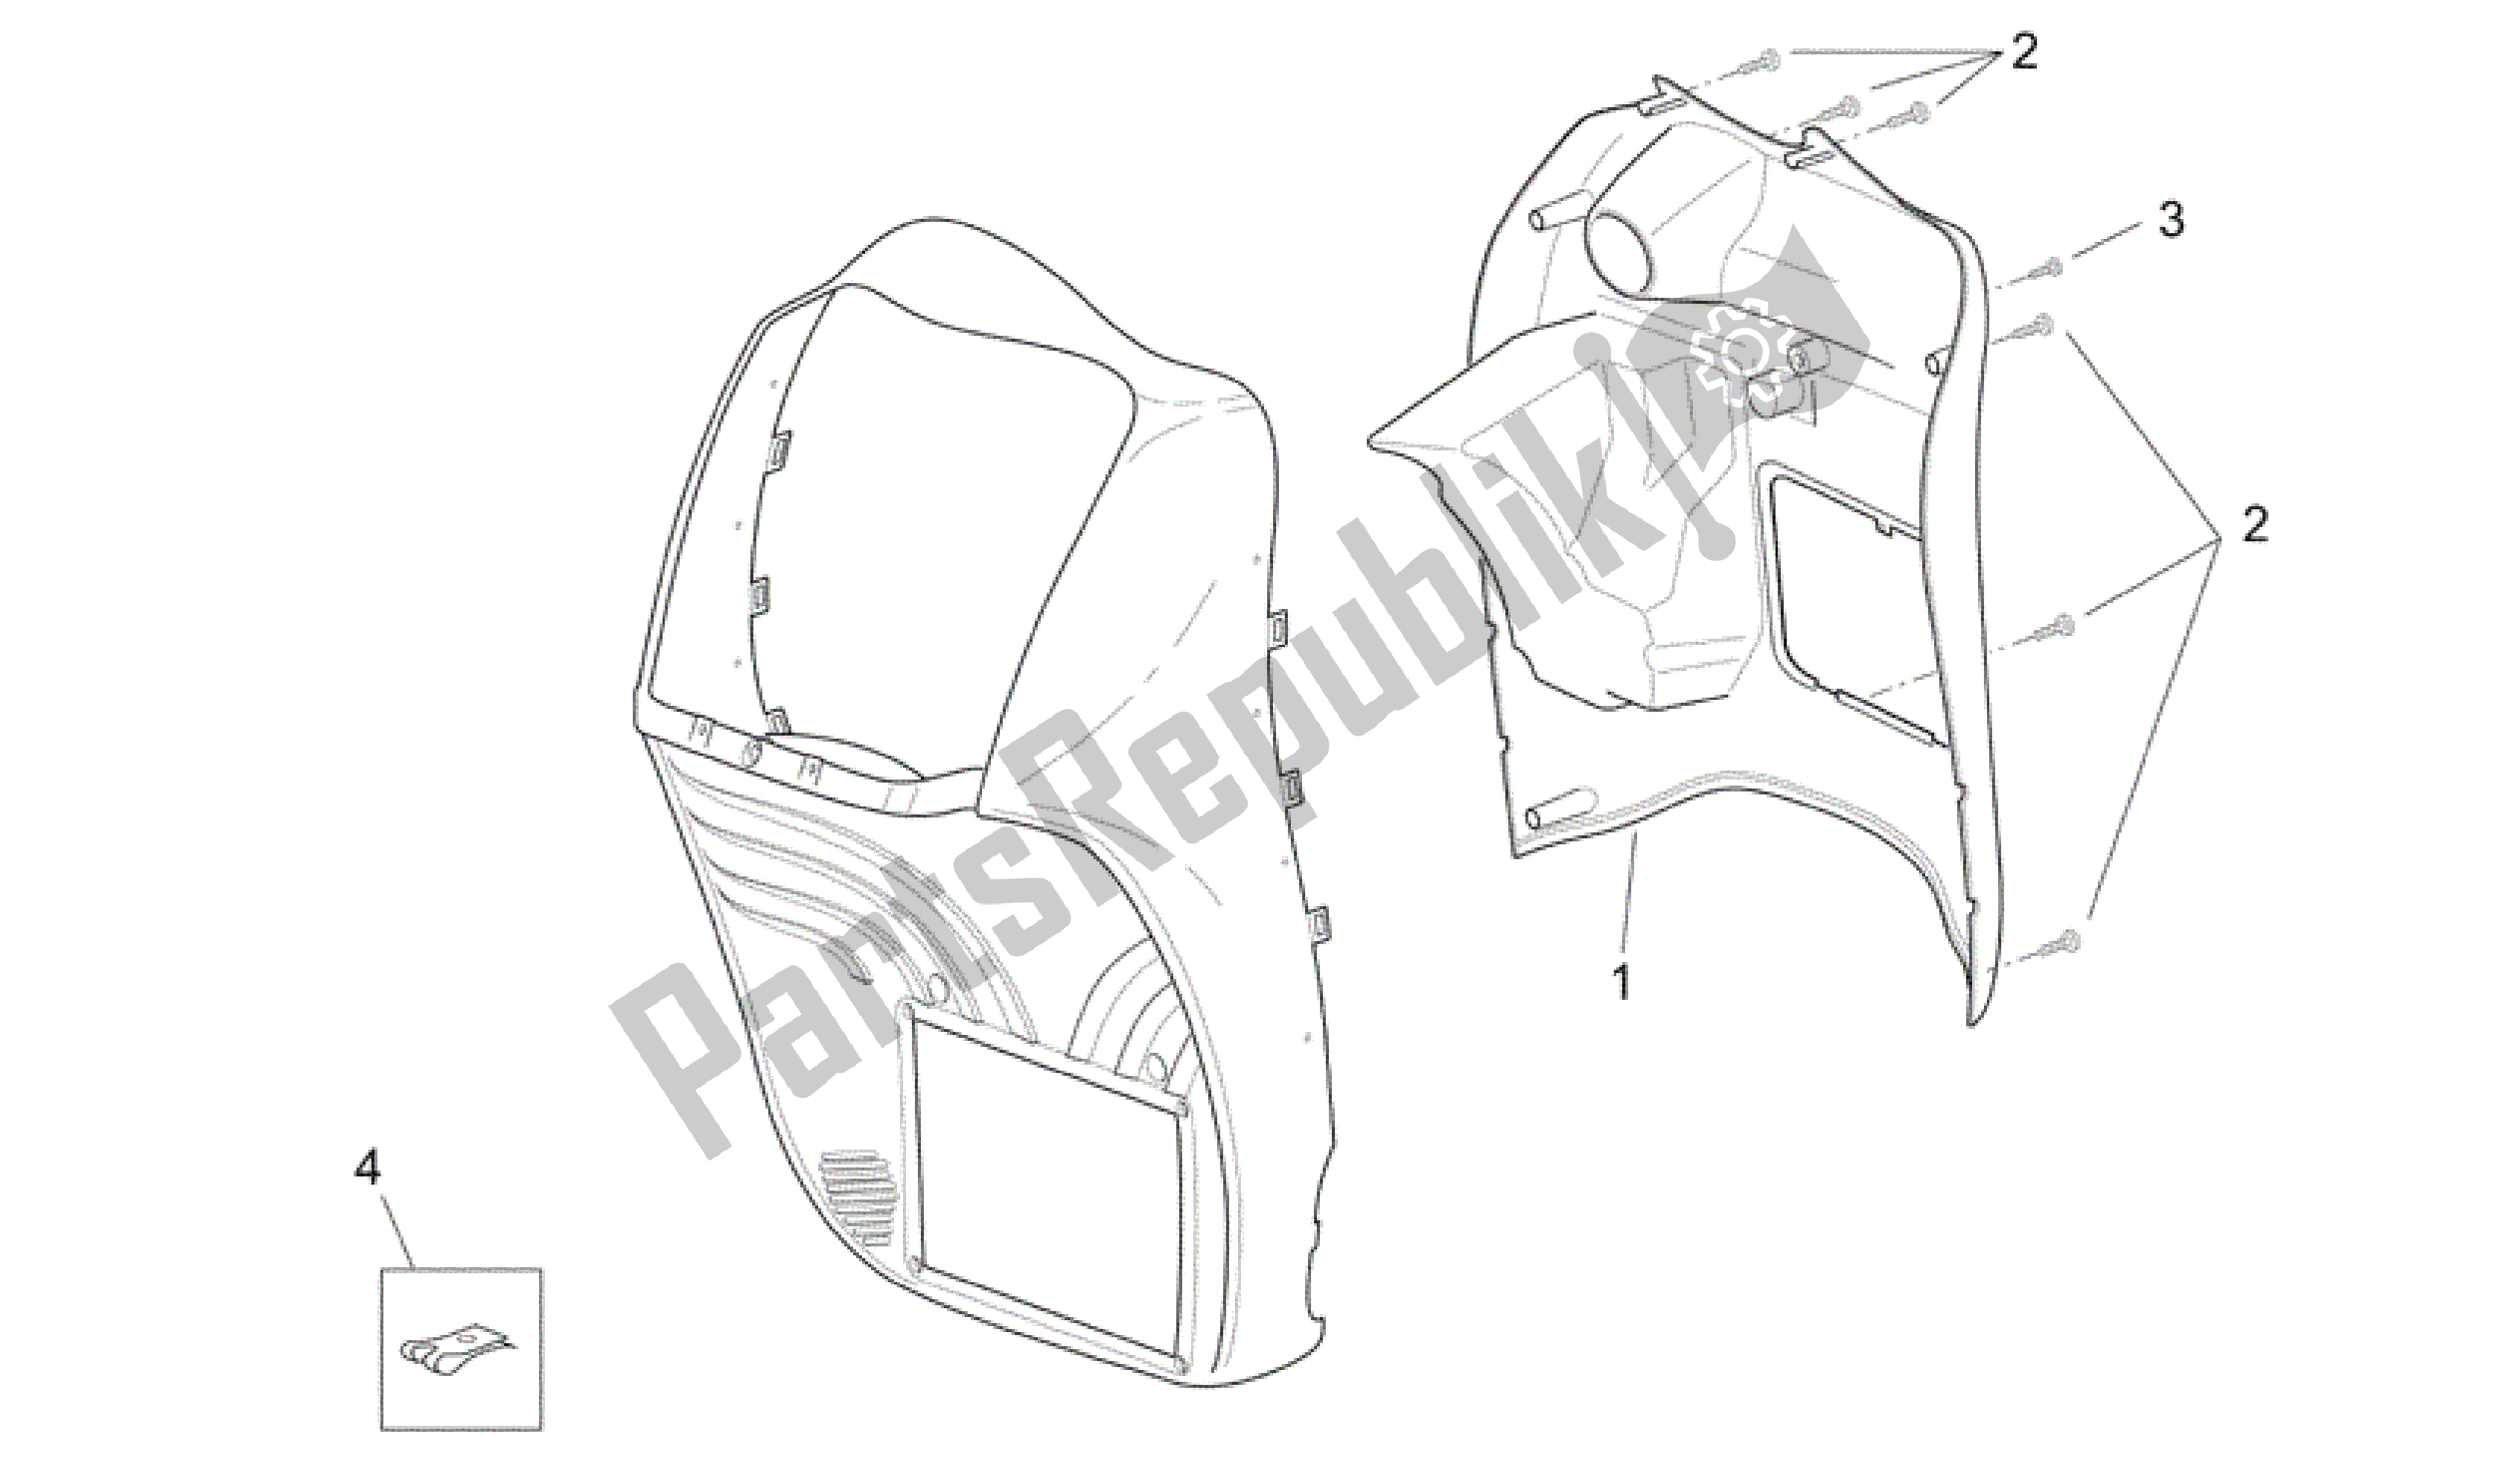 All parts for the Front Body - Internal Shield of the Aprilia Scarabeo 250 2004 - 2006